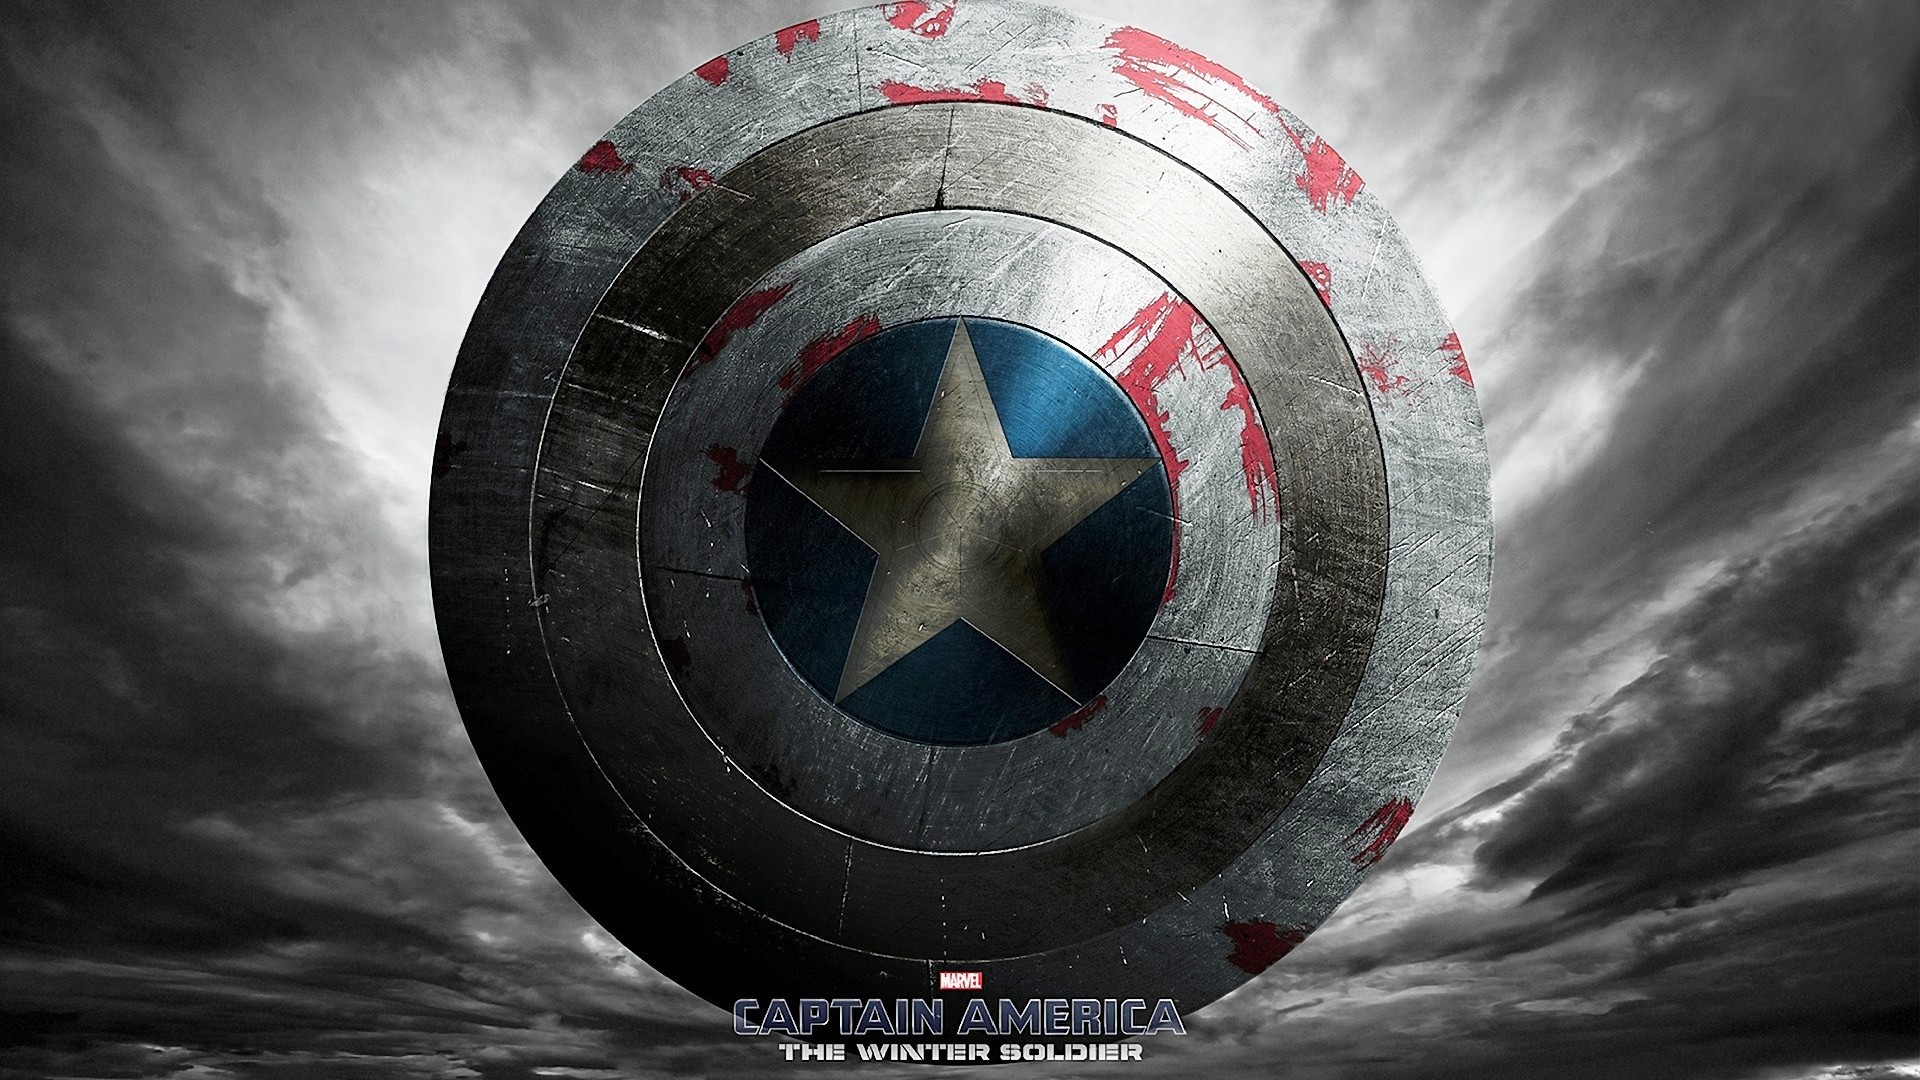 1920x1080 Captain america shield wallpapers high quality resolution.